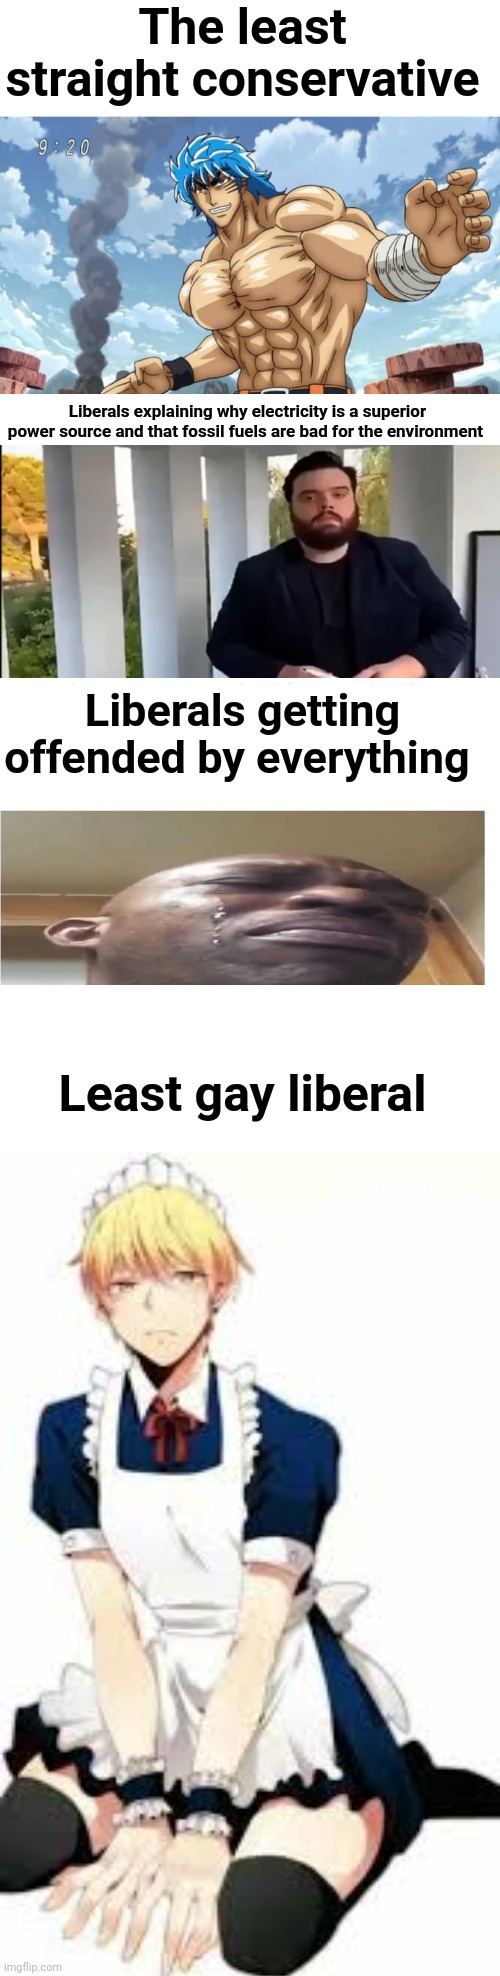 Political slander | The least straight conservative; Liberals explaining why electricity is a superior power source and that fossil fuels are bad for the environment; Liberals getting offended by everything; Least gay liberal | image tagged in memes,slander | made w/ Imgflip meme maker